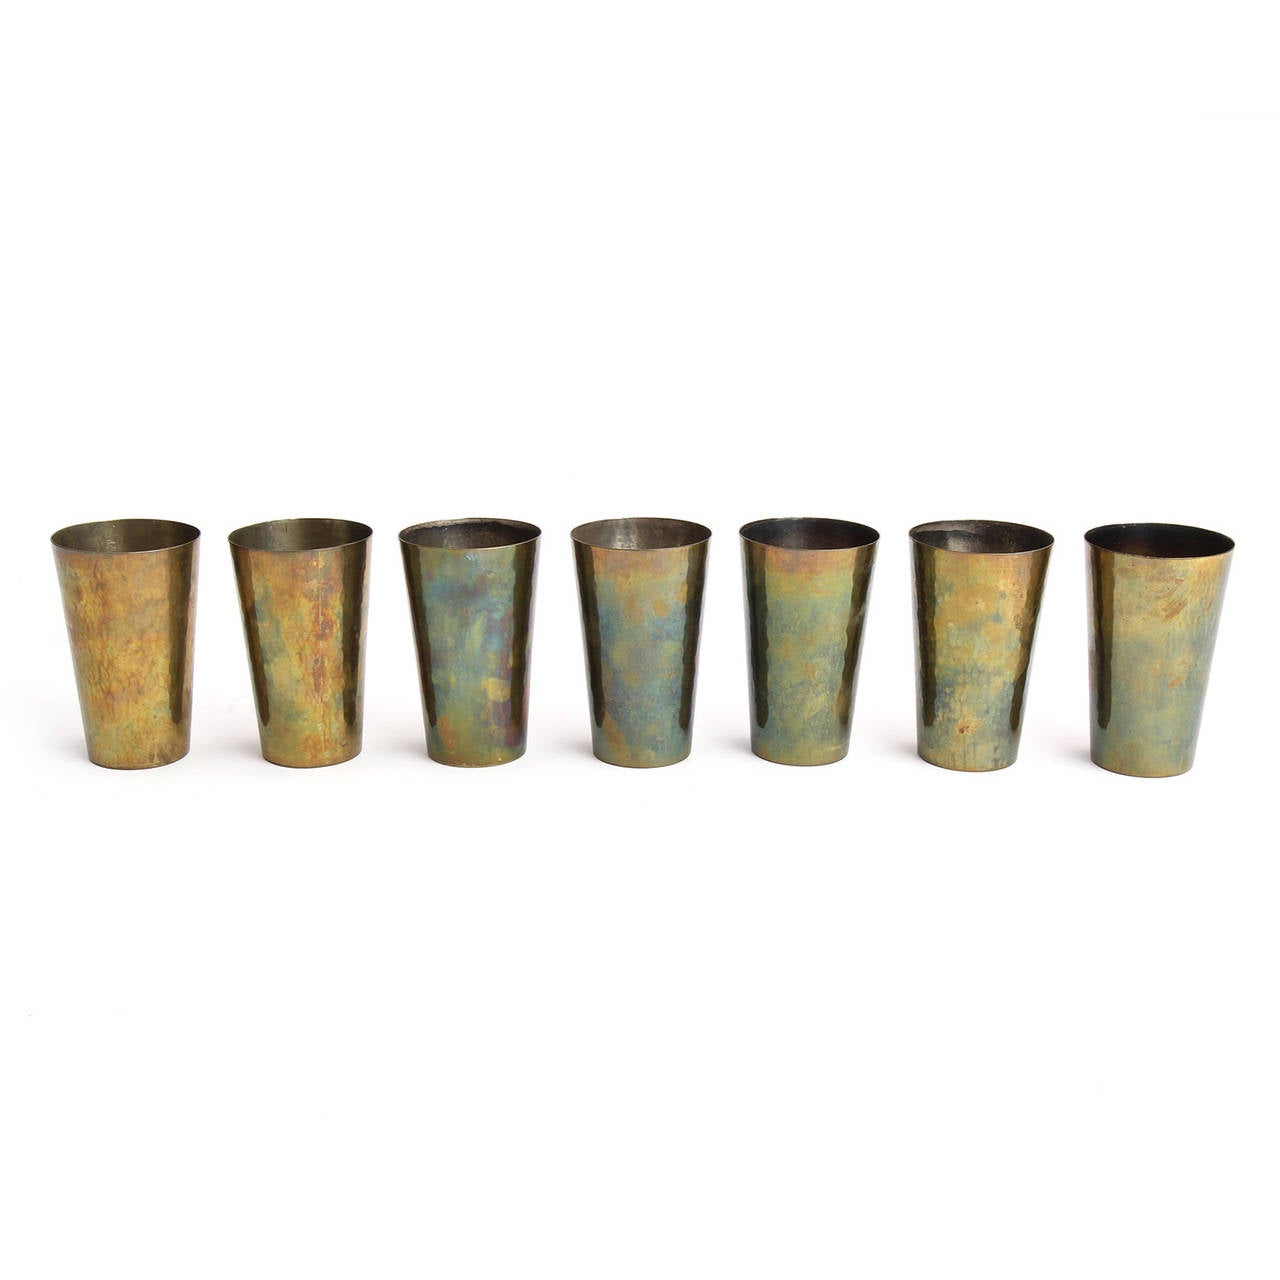 A fine and precisely rendered set of handmade hammered brass beakers or glasses having an elegant flaring form and a warm variegated patina.